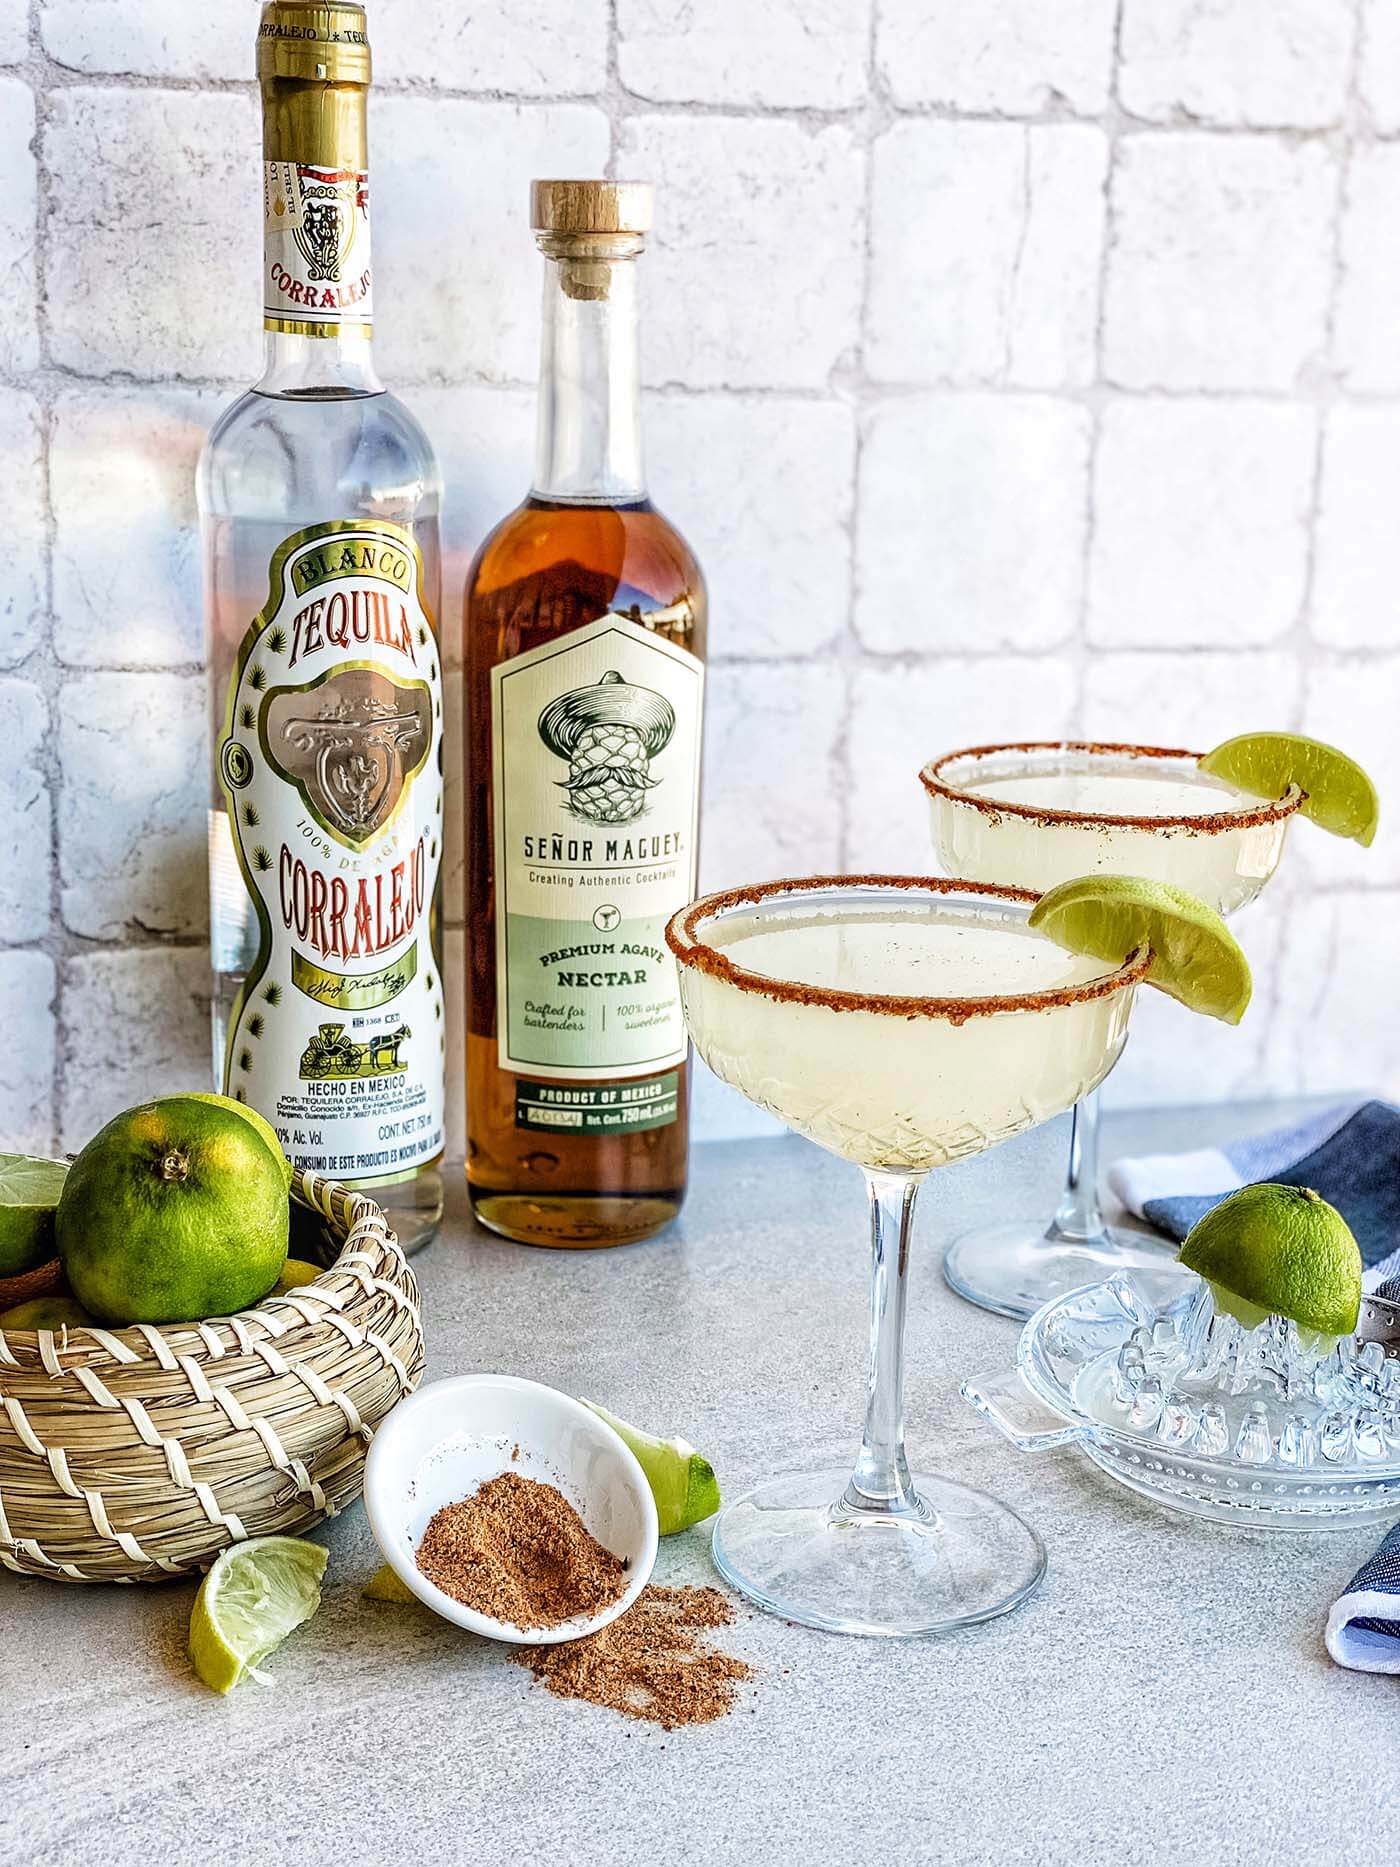 Product image for “Classic Chilli Tequila Margarita Cocktail Kit”